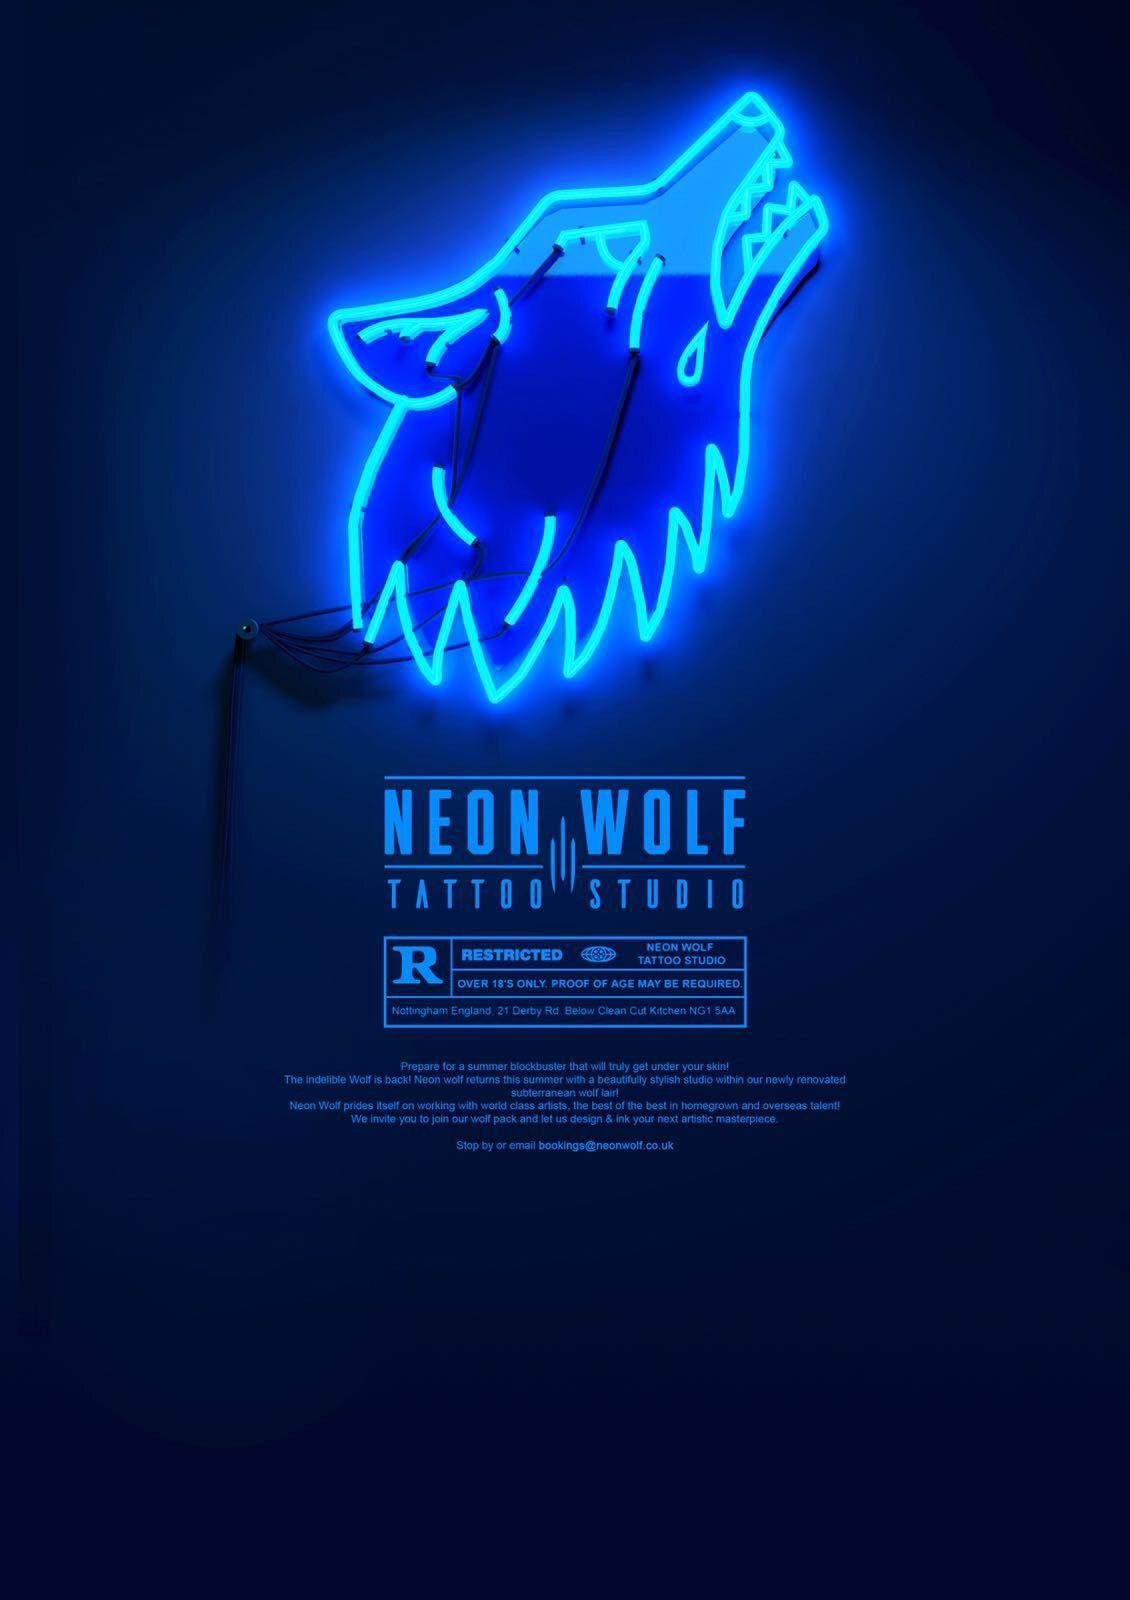 Neon Wolf Logo - Guest Artist Positions Available Tattoo Planet Community Forum